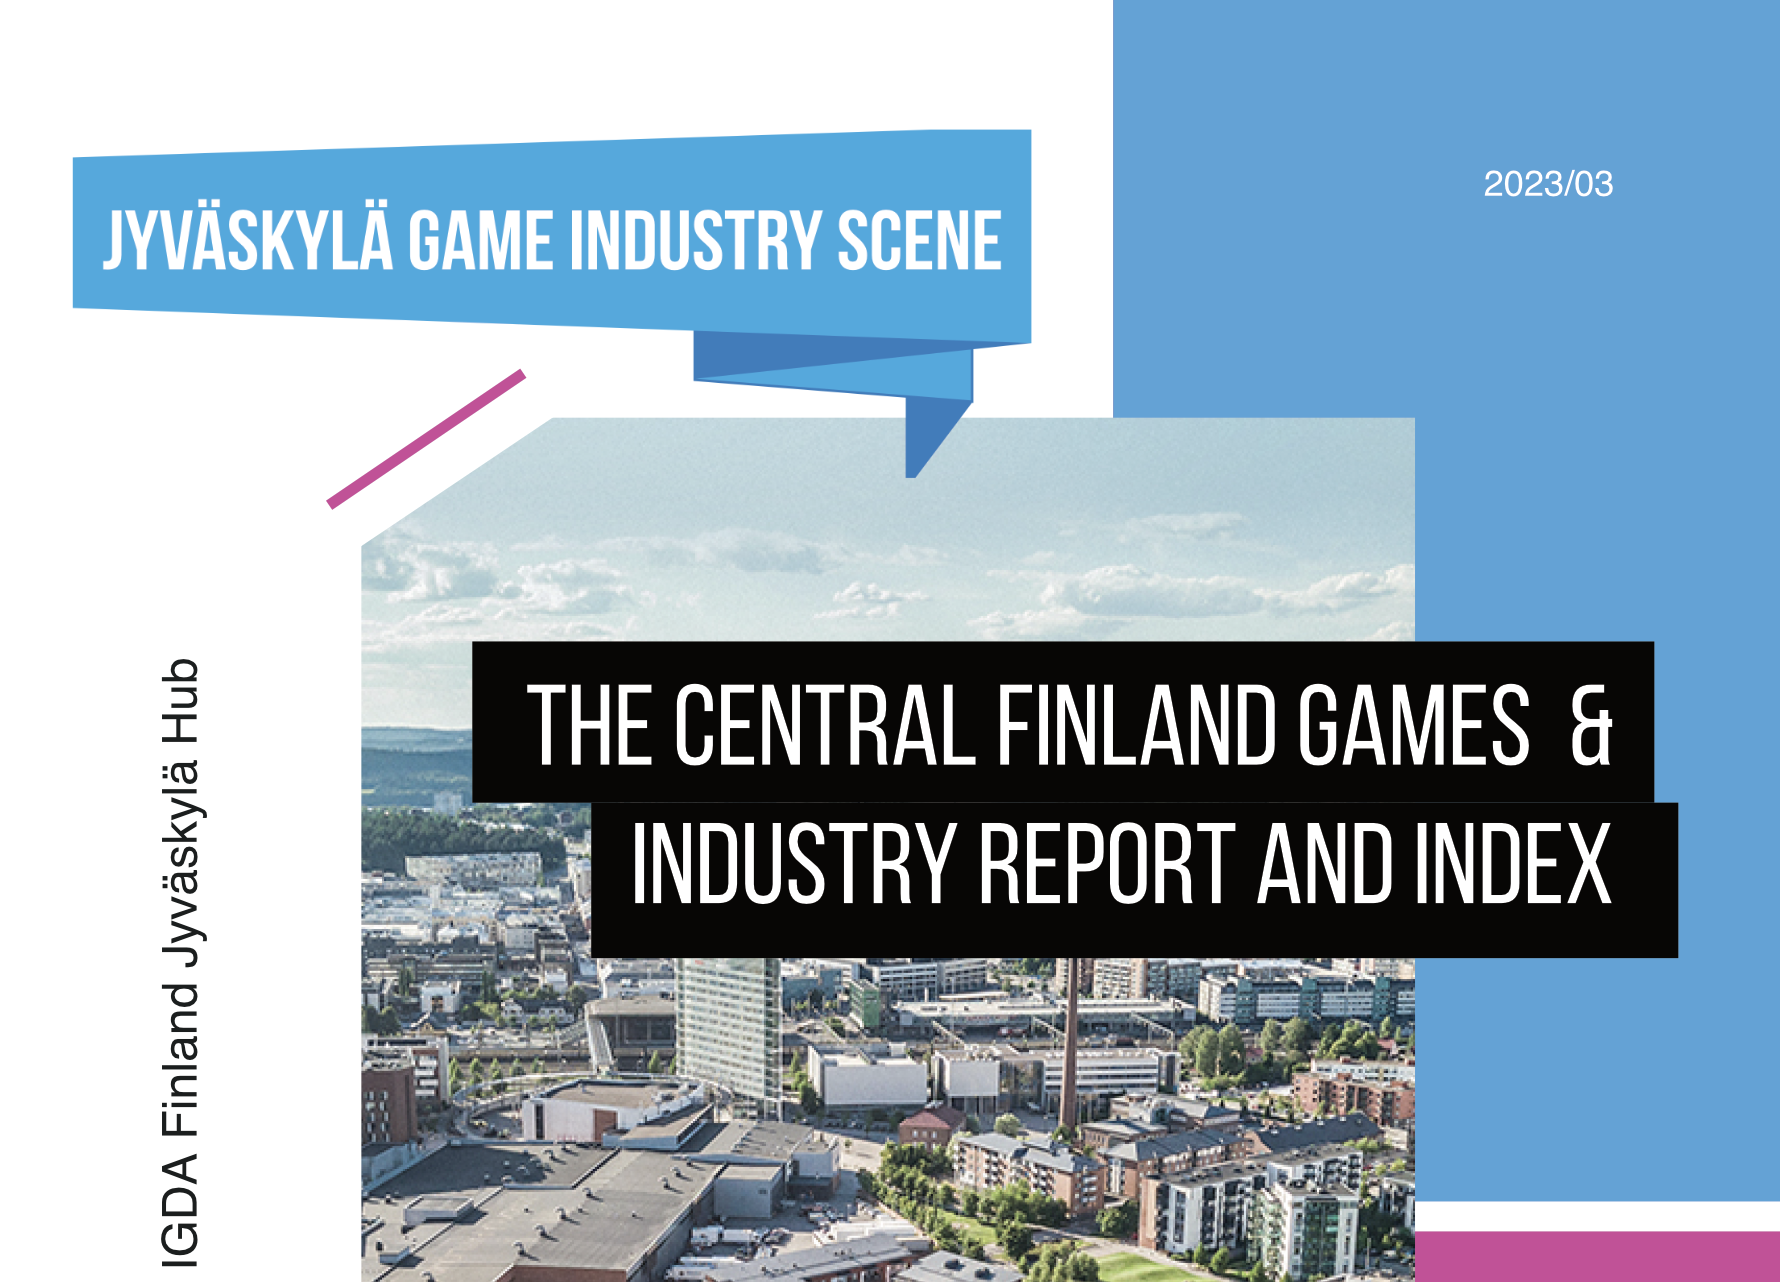 he Central Finland Games & industry report and index 2022-picture-1